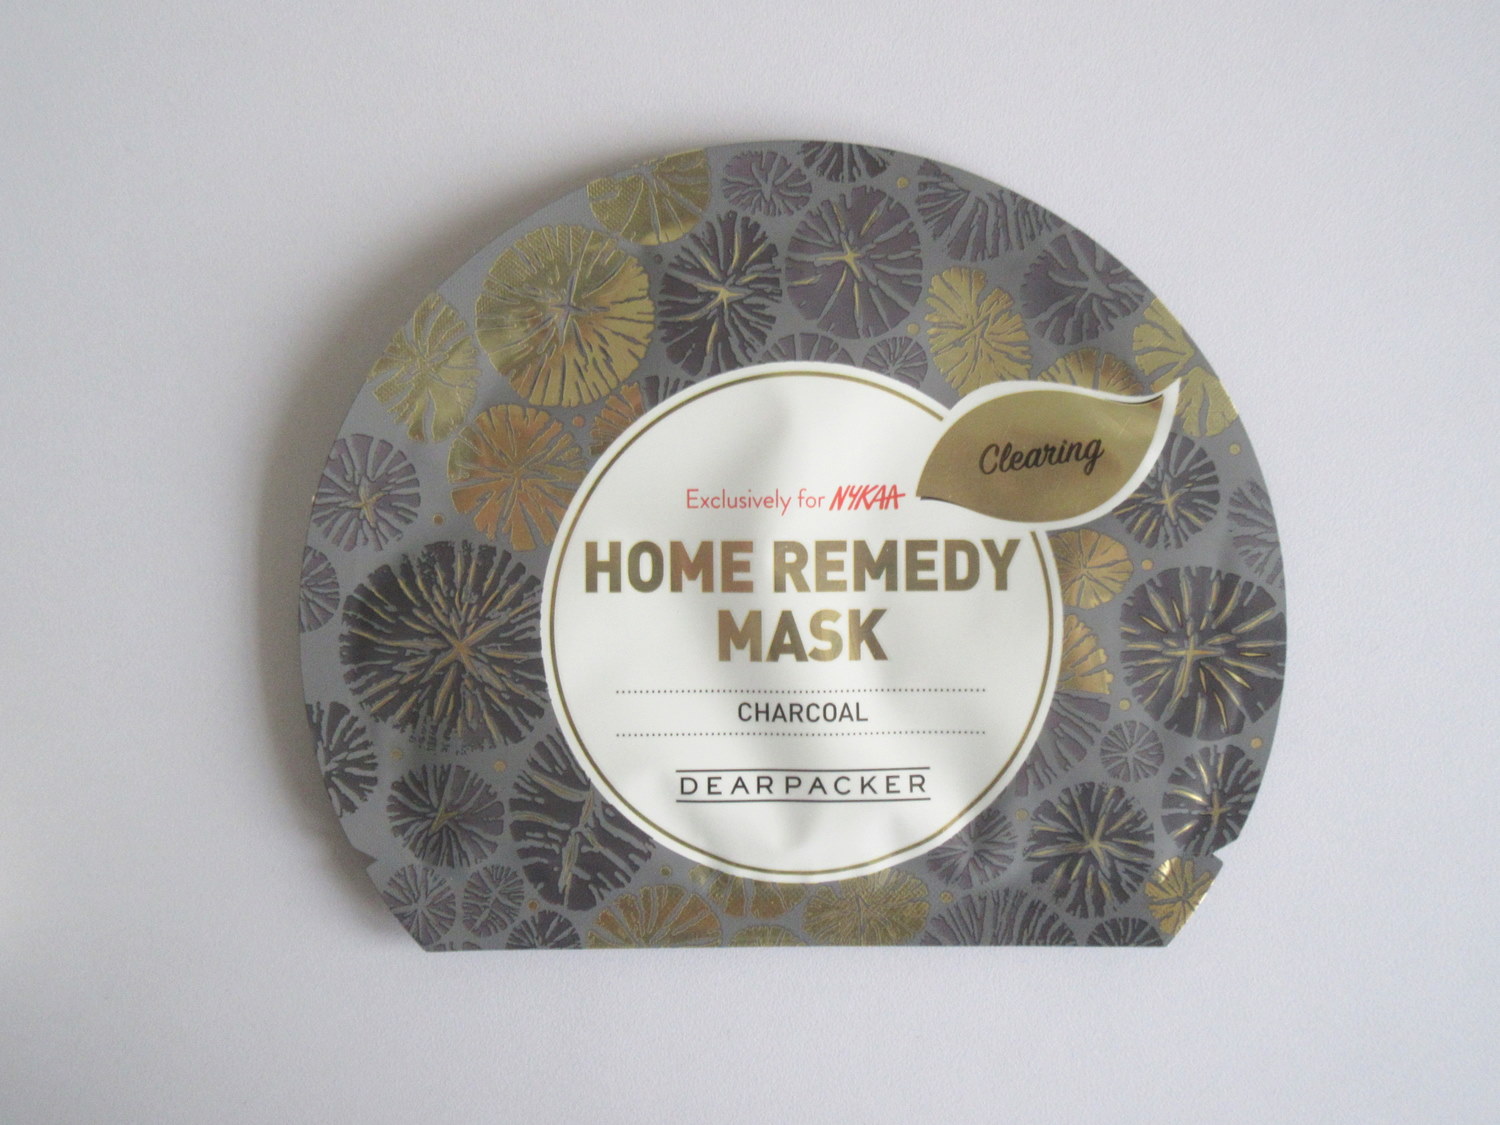 Dear Packer Home Remedy Mask in Charcoal